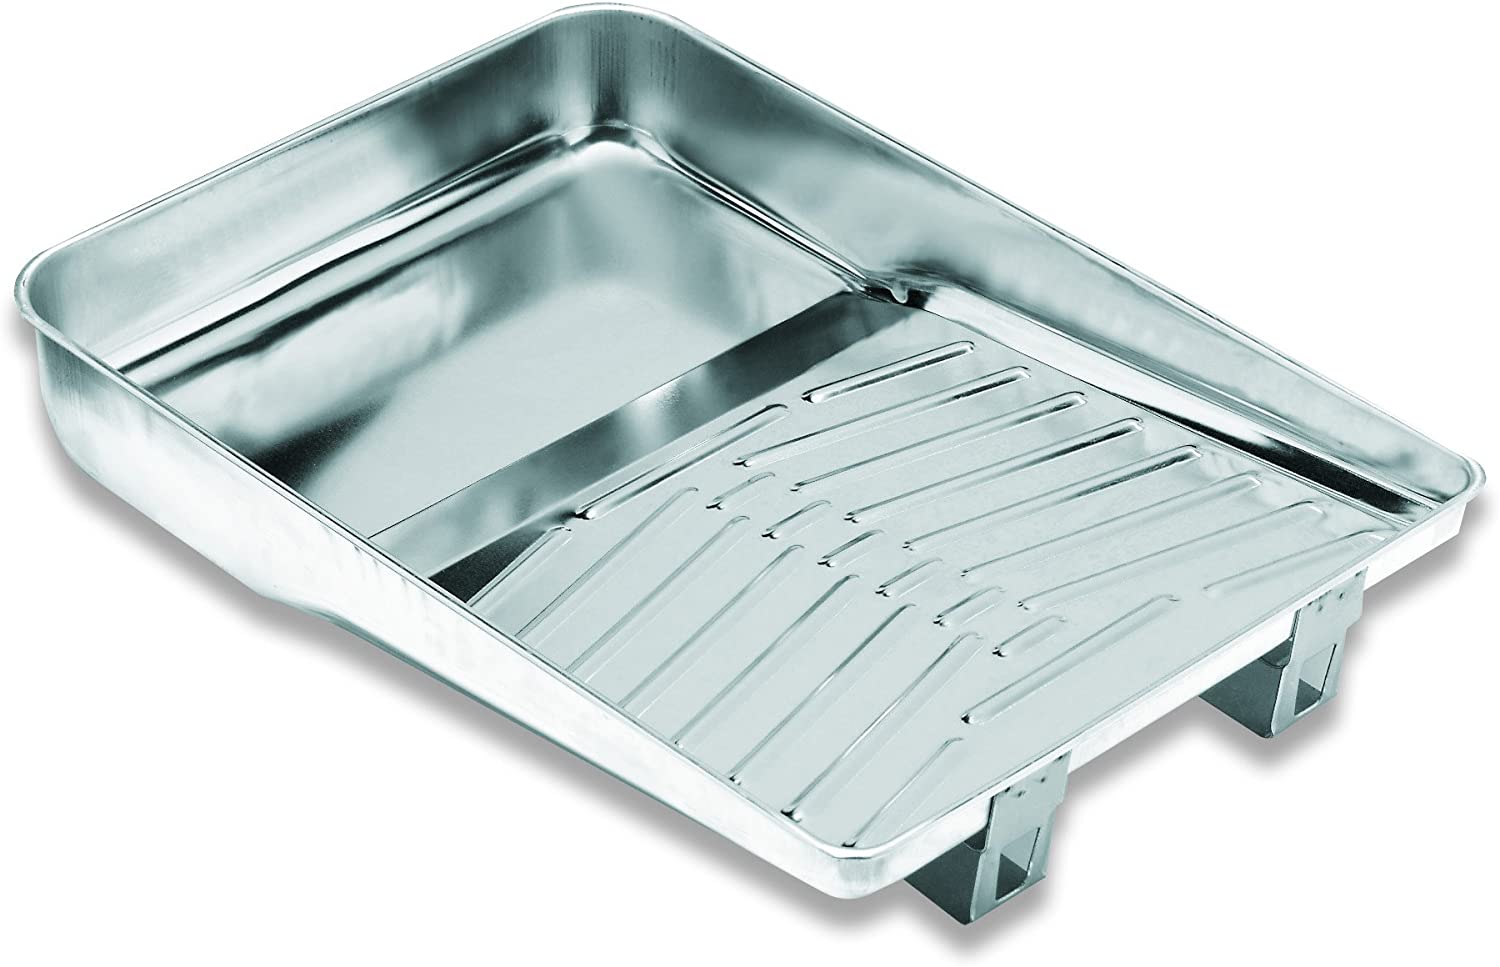 Wooster R402-11 Deluxe Metal Tray, 11"